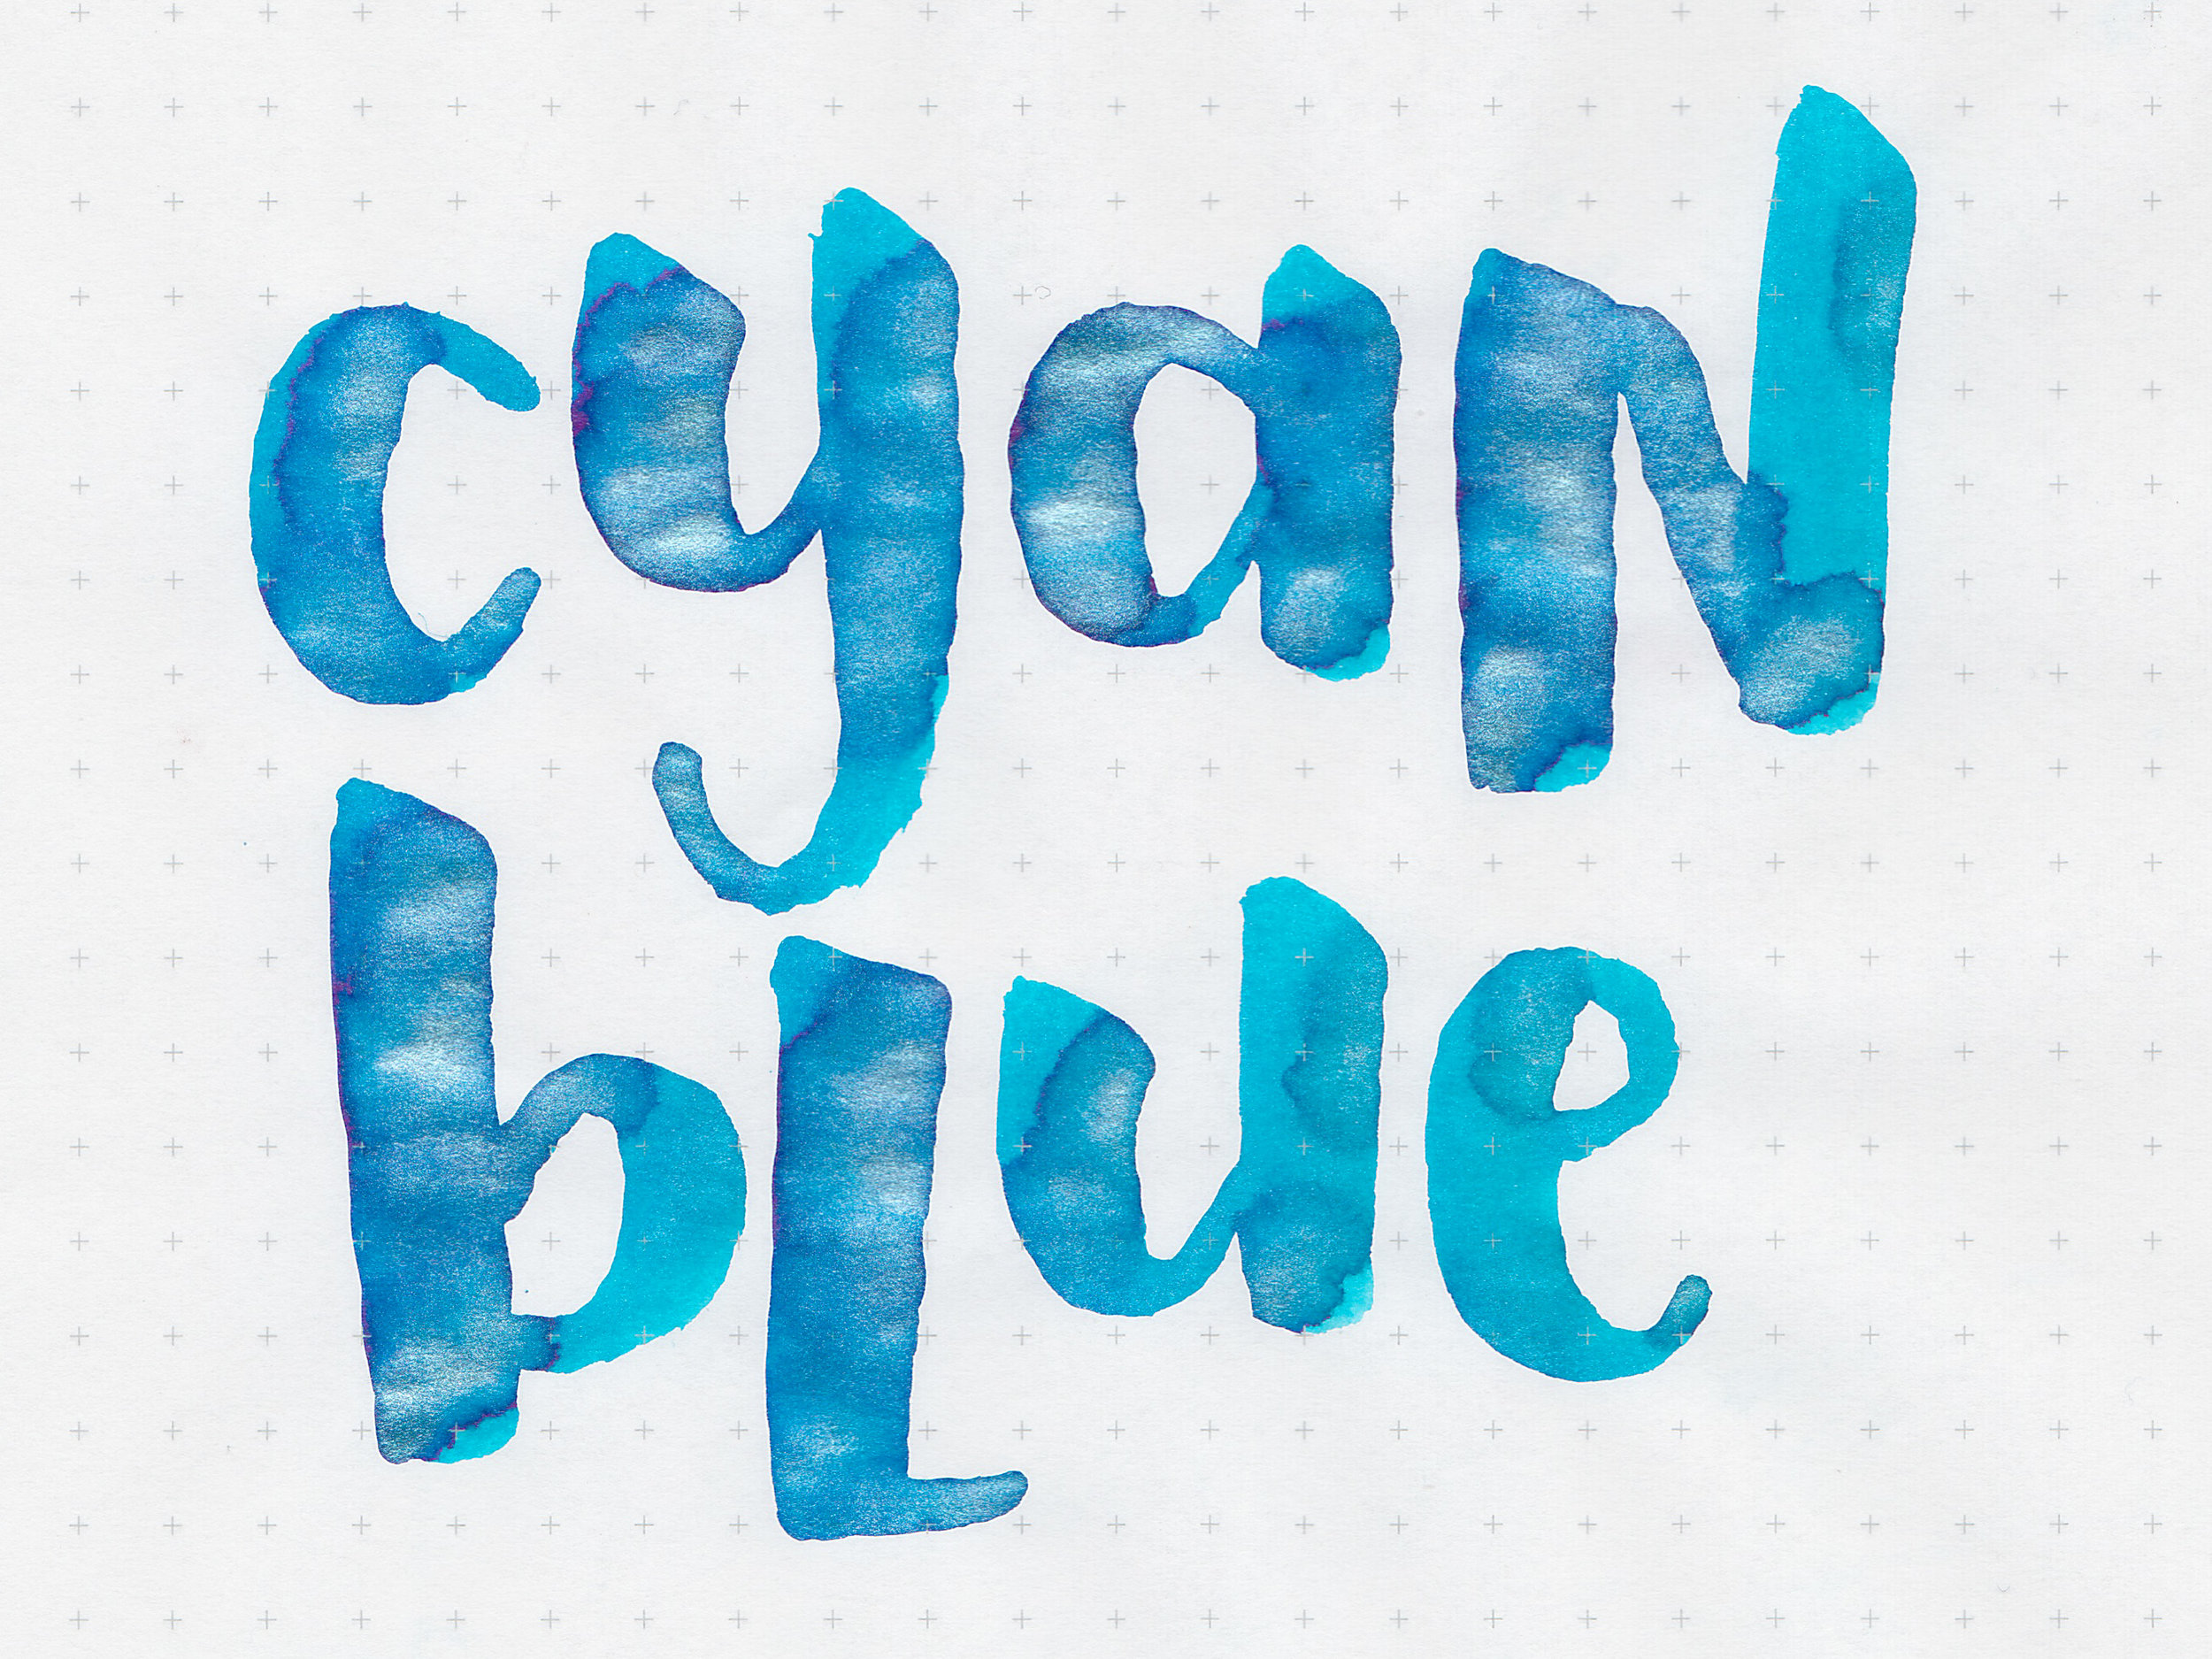 Ink Review: De Atramentis Pearlescent Cyan Blue — Mountain of Ink